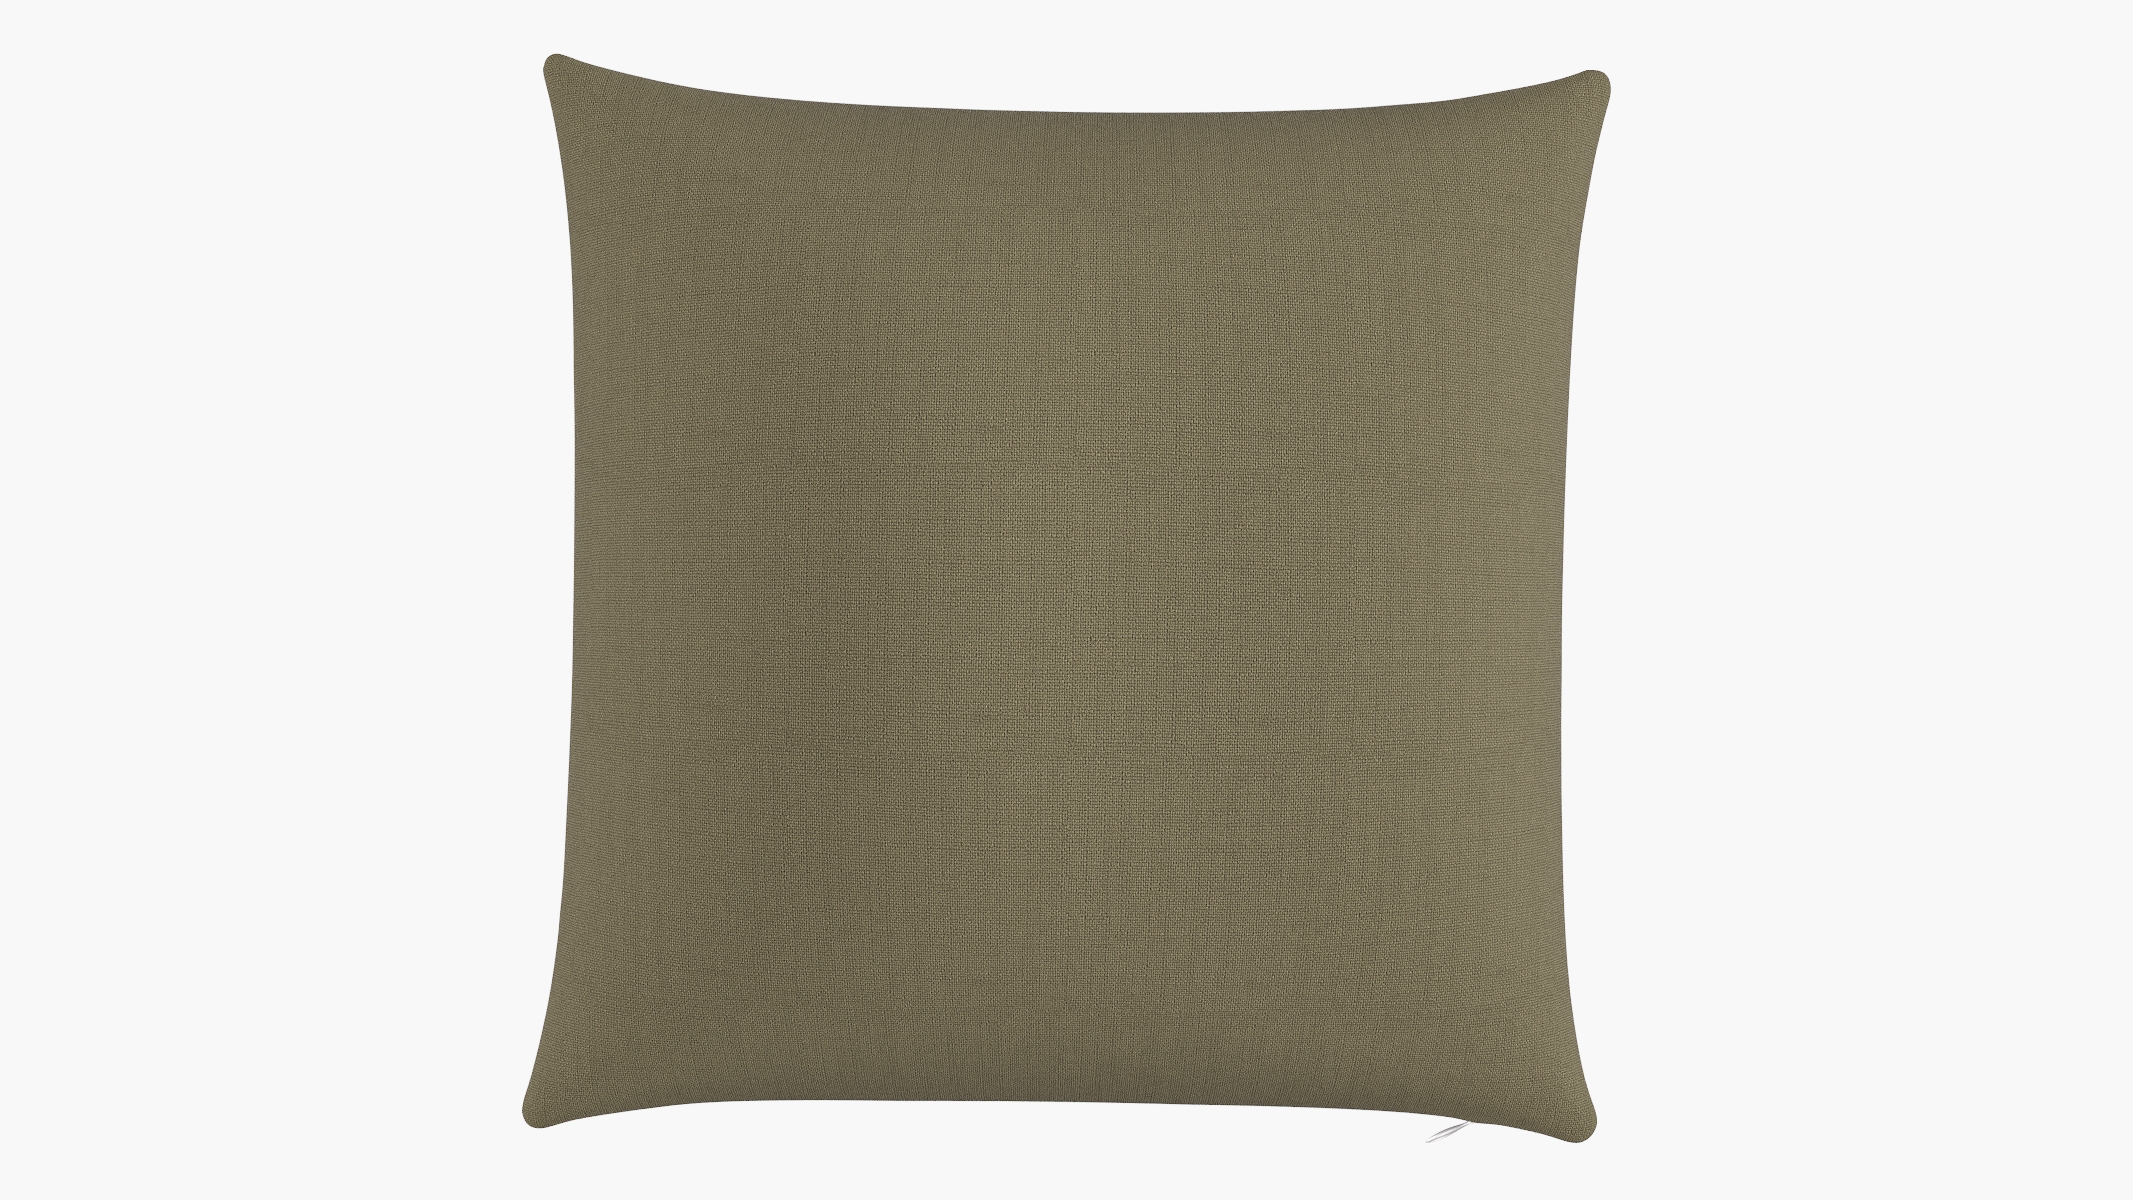 Throw Pillow 22", Olive Everyday Linen, 22" x 22" - Image 0